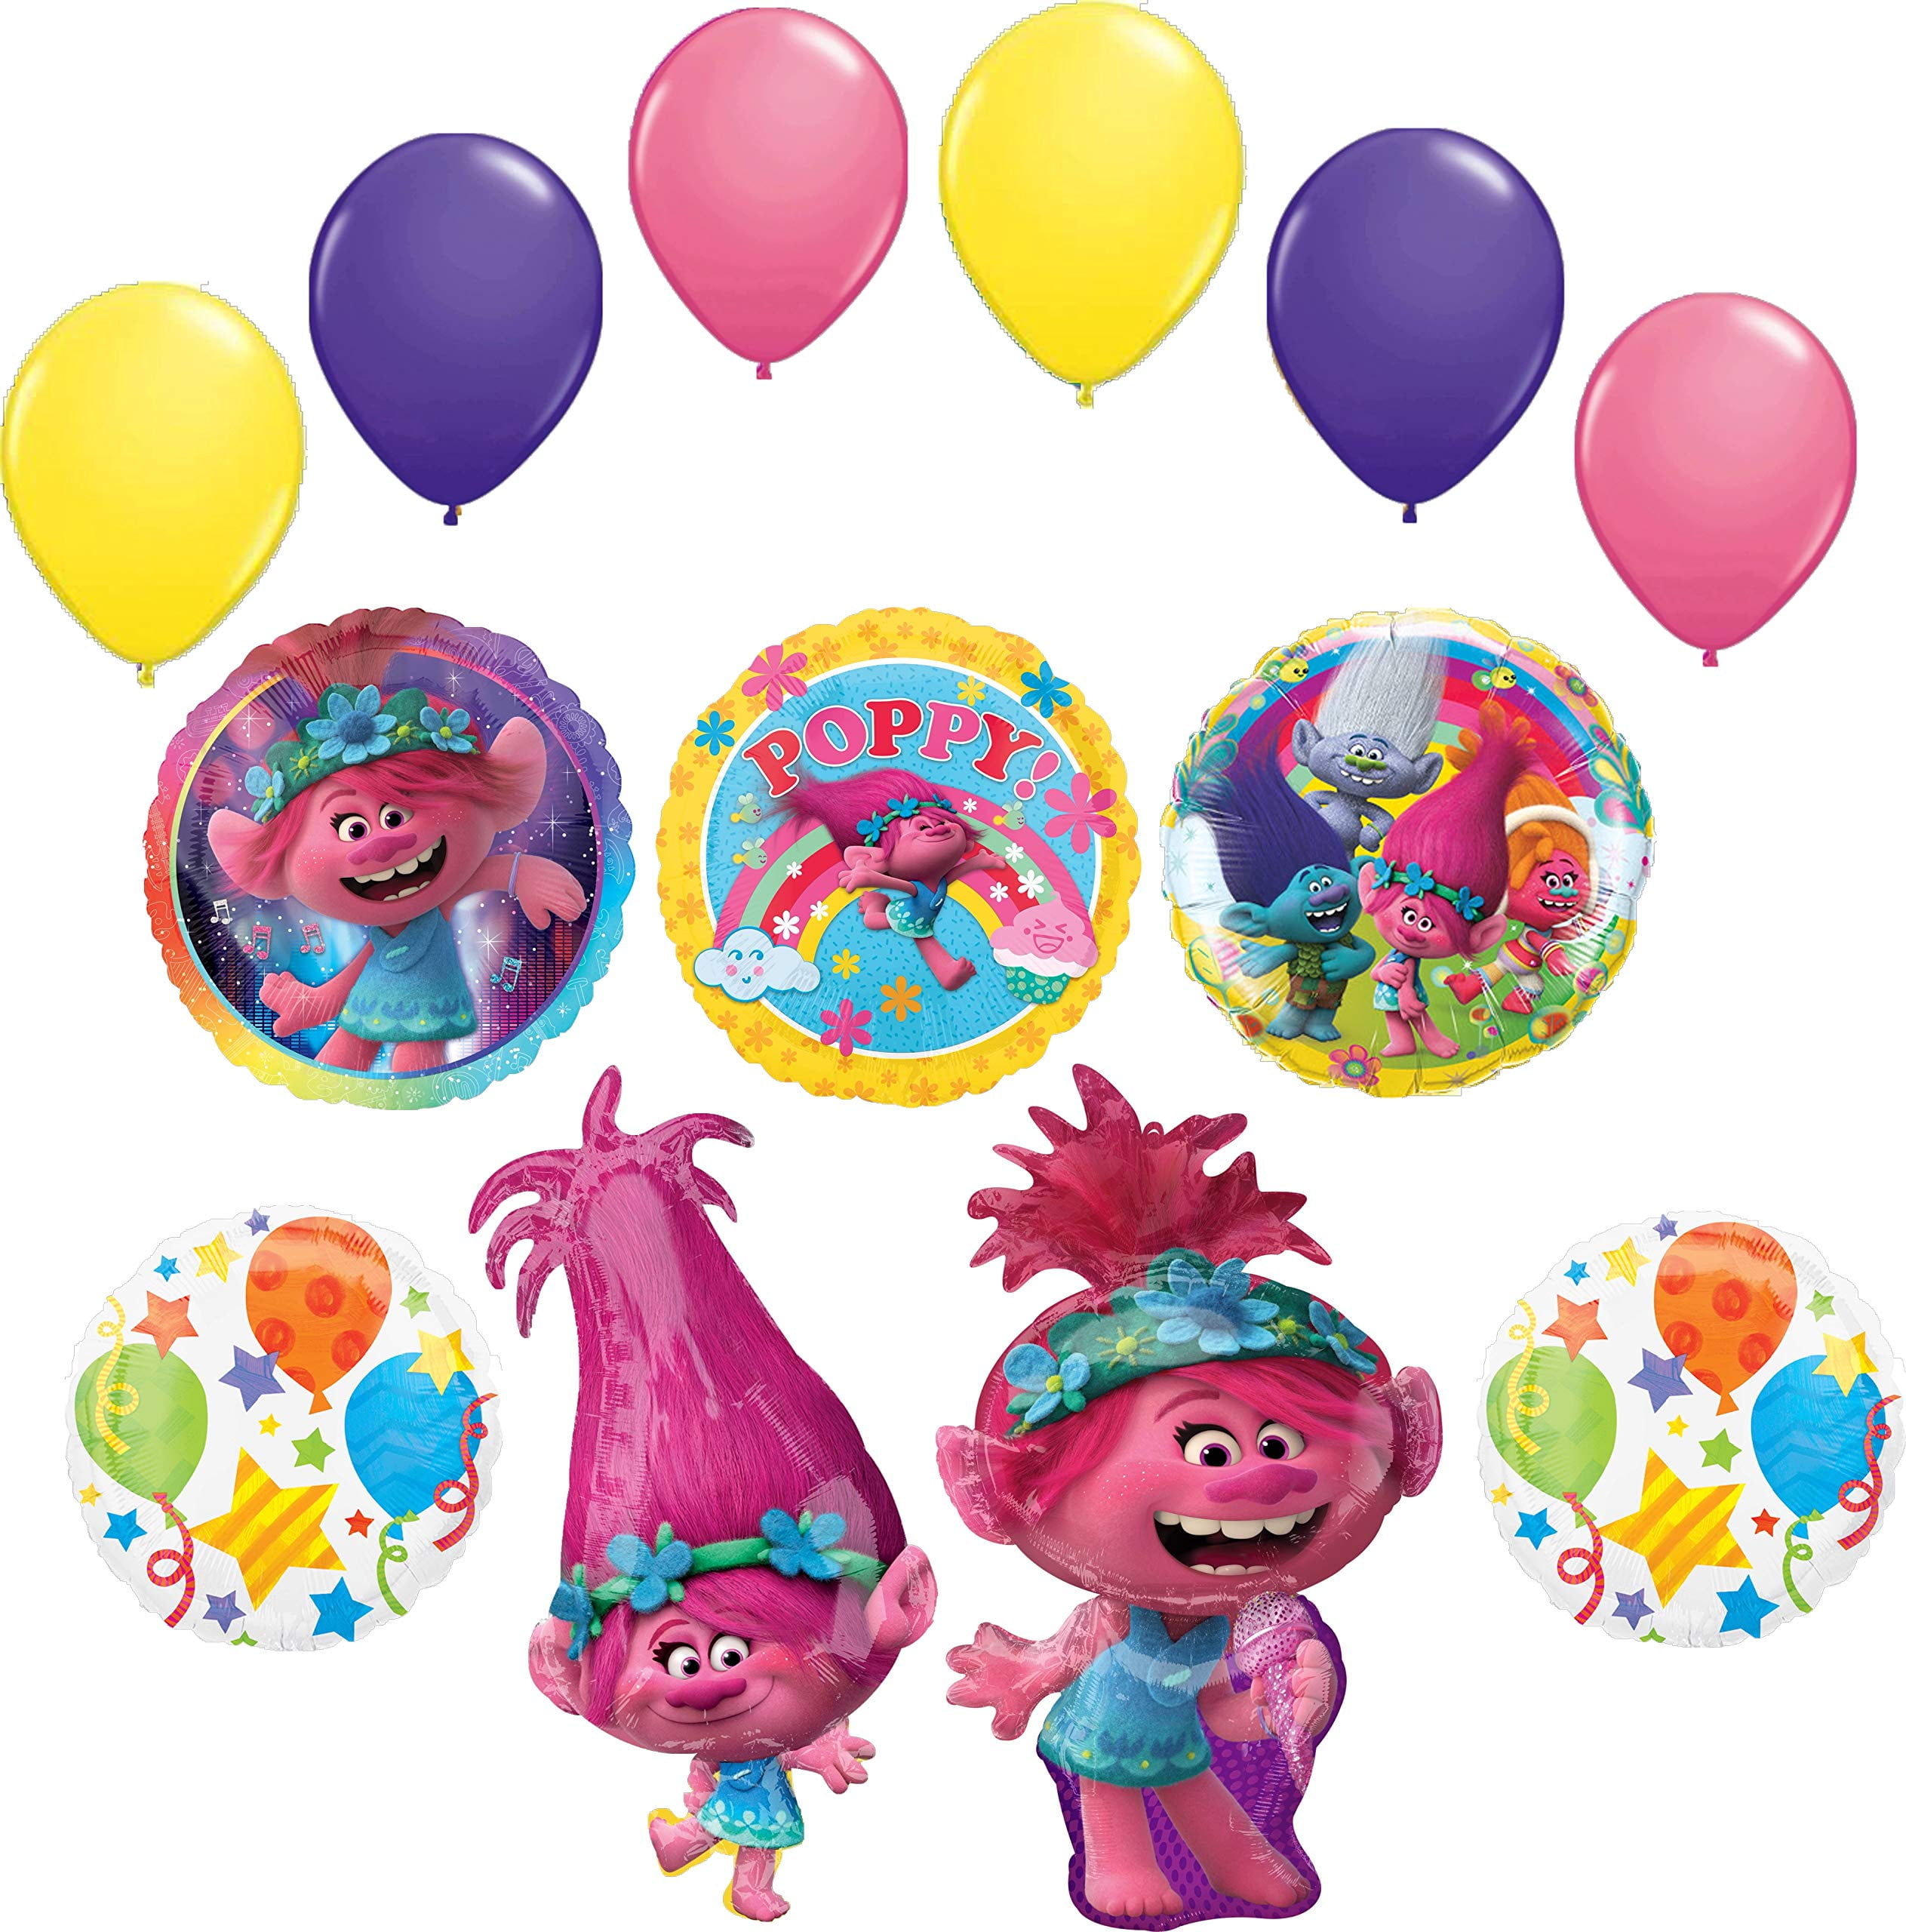 Trolls Birthday Balloons Princess Poppy Party Decorations Age Number World Tour